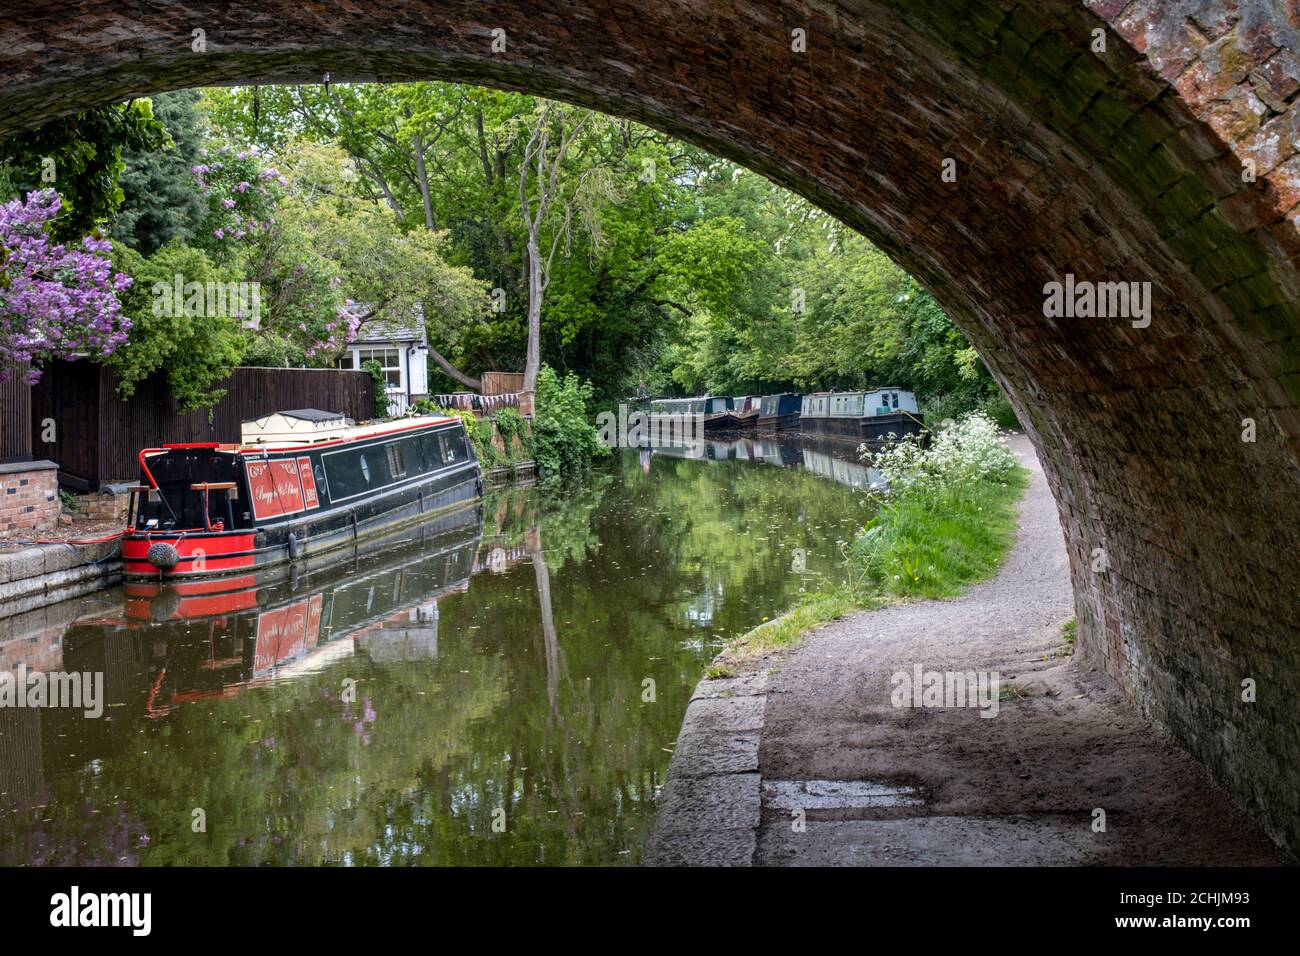 Narrowboats moored near Black Horse Bridge no. 3 on the Grand Union Canal, Foxton, Leicestershire, England Stock Photo